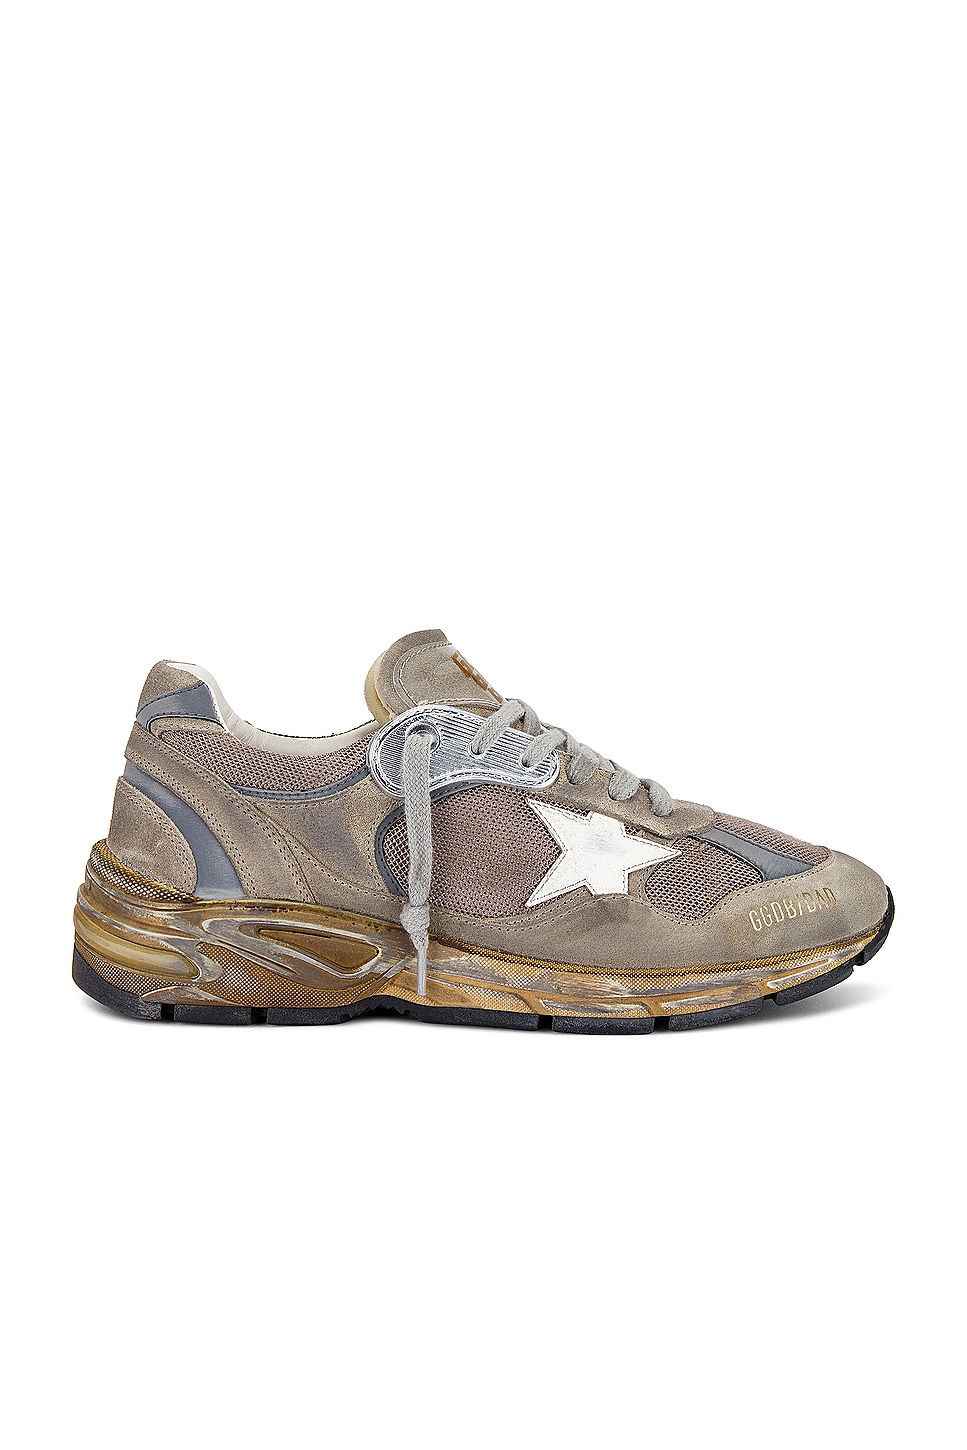 Image 1 of Golden Goose Running Dad Suede Leather Star in Taupe, Silver, & White